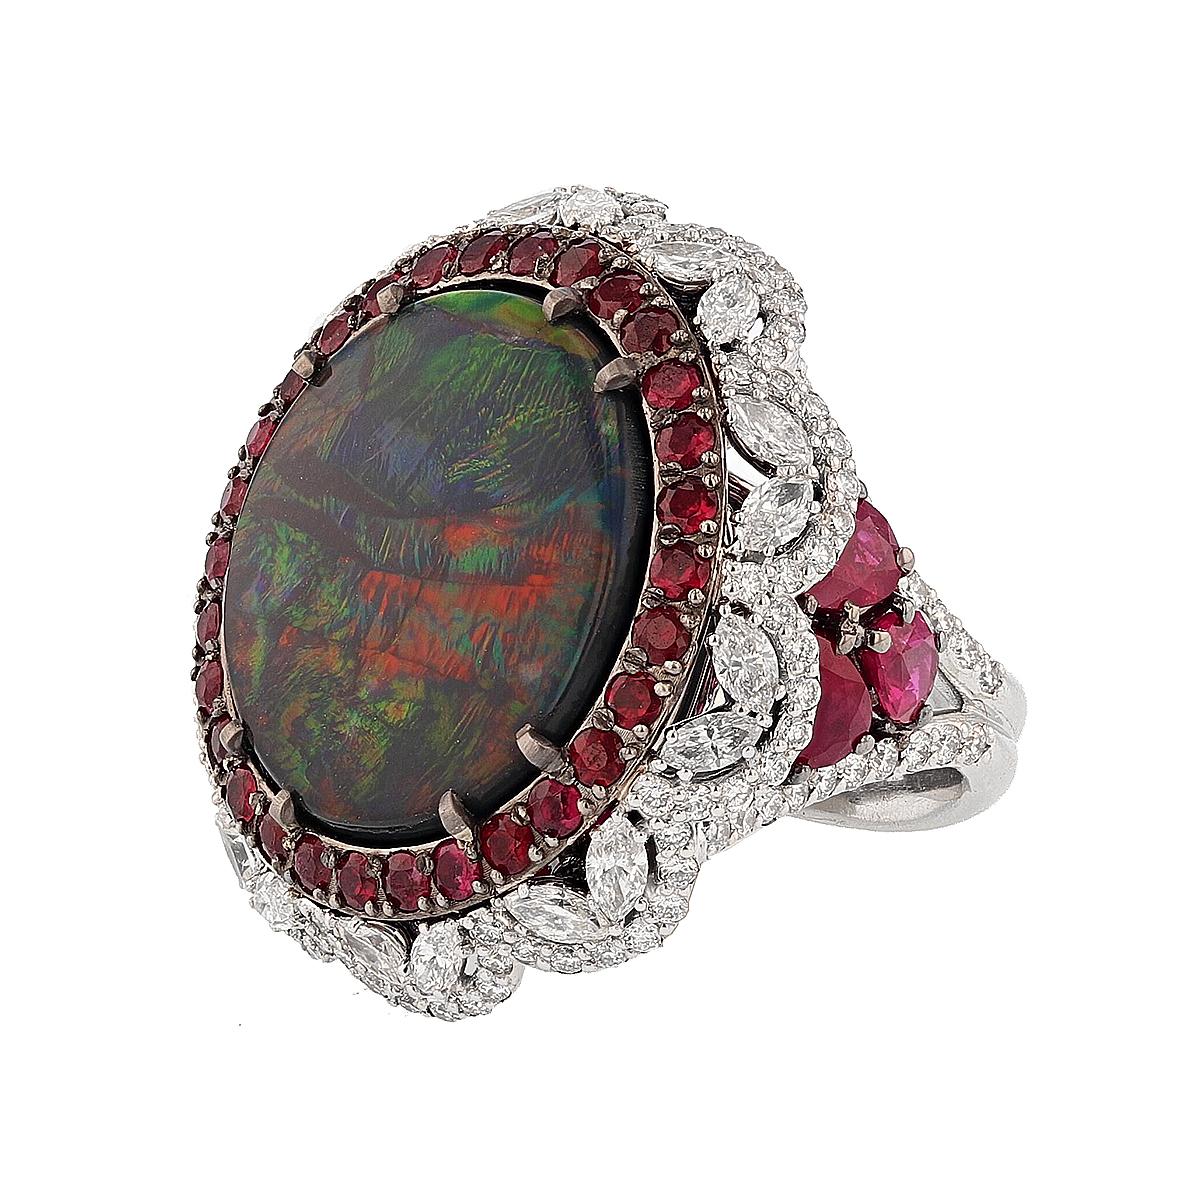 This ring is made with 14 karat white gold and features an 11.11ct  GIA  certified Australian Black Opal (GIA Certificate number: 5202388982) with a mixture of colors like red, orange, green, and blue and is surrounded by 121 prong set round cut